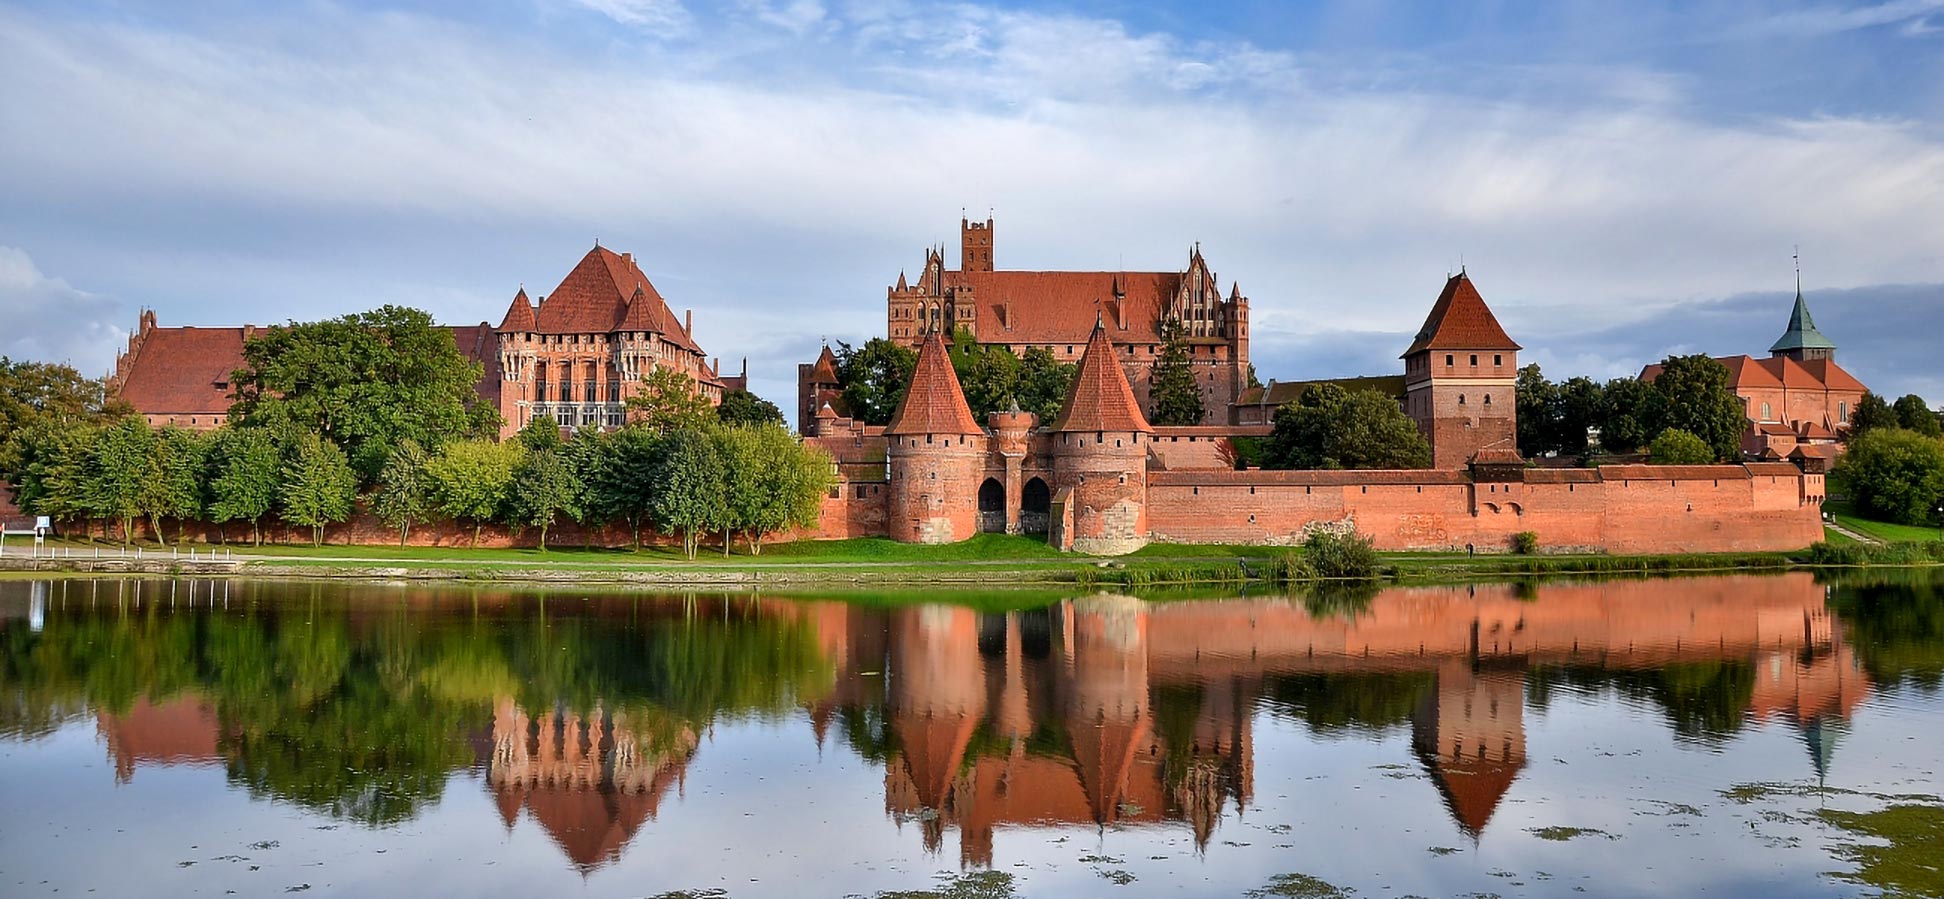 PolandTour Packages - Book honeymoon ,family,adventure tour packages to Poland|Travel Knits